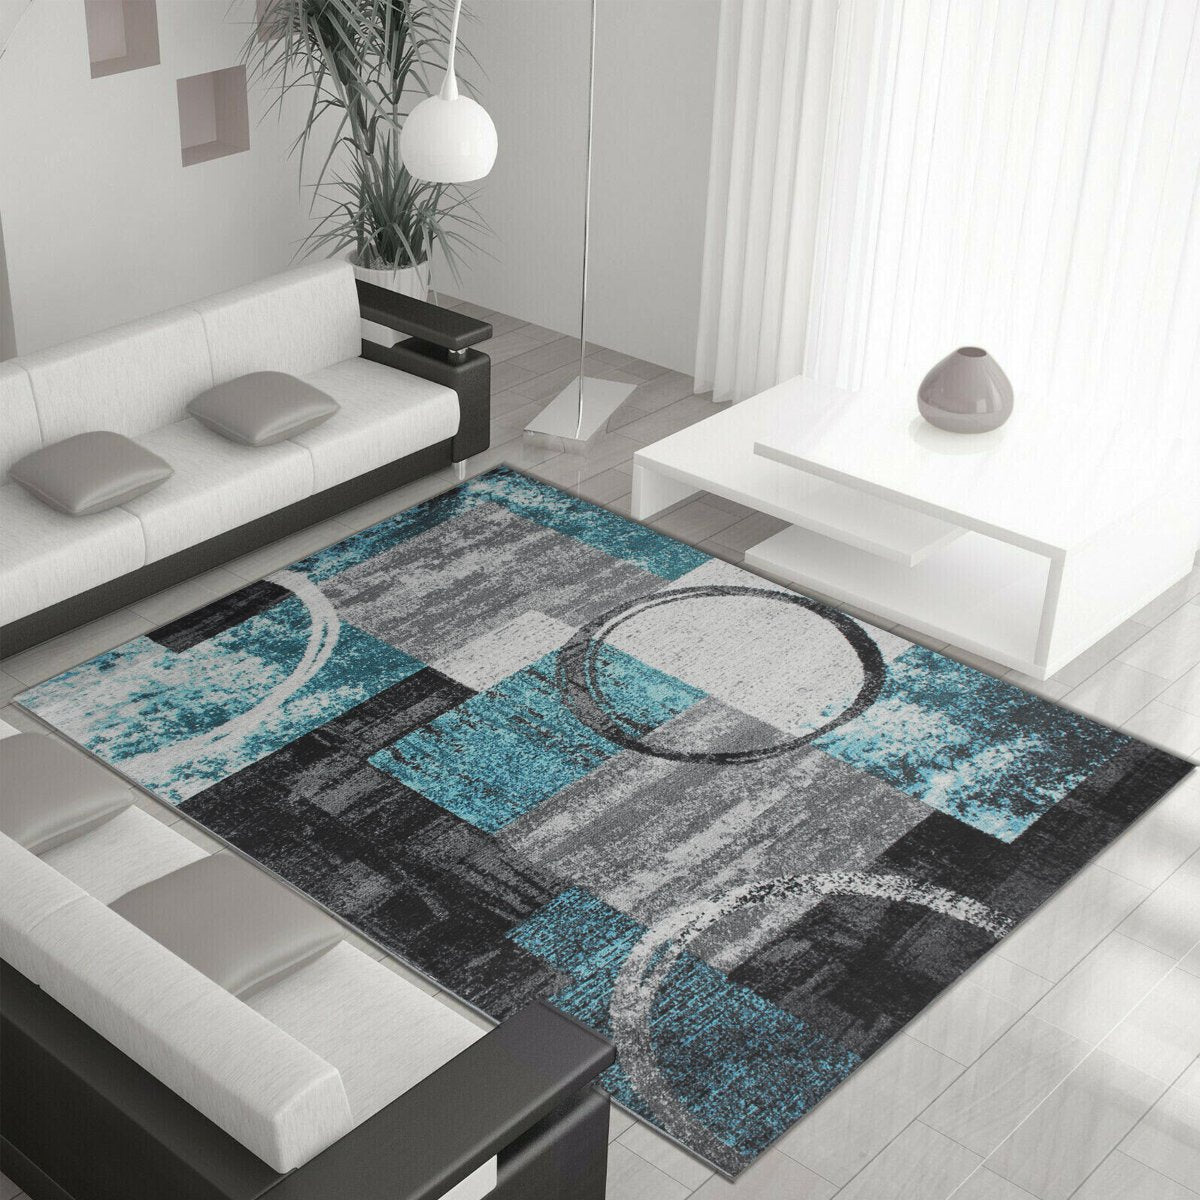 Abstract Extra Small Large Modern Area Rugs Floor Carpet Rug Mat For Living Room